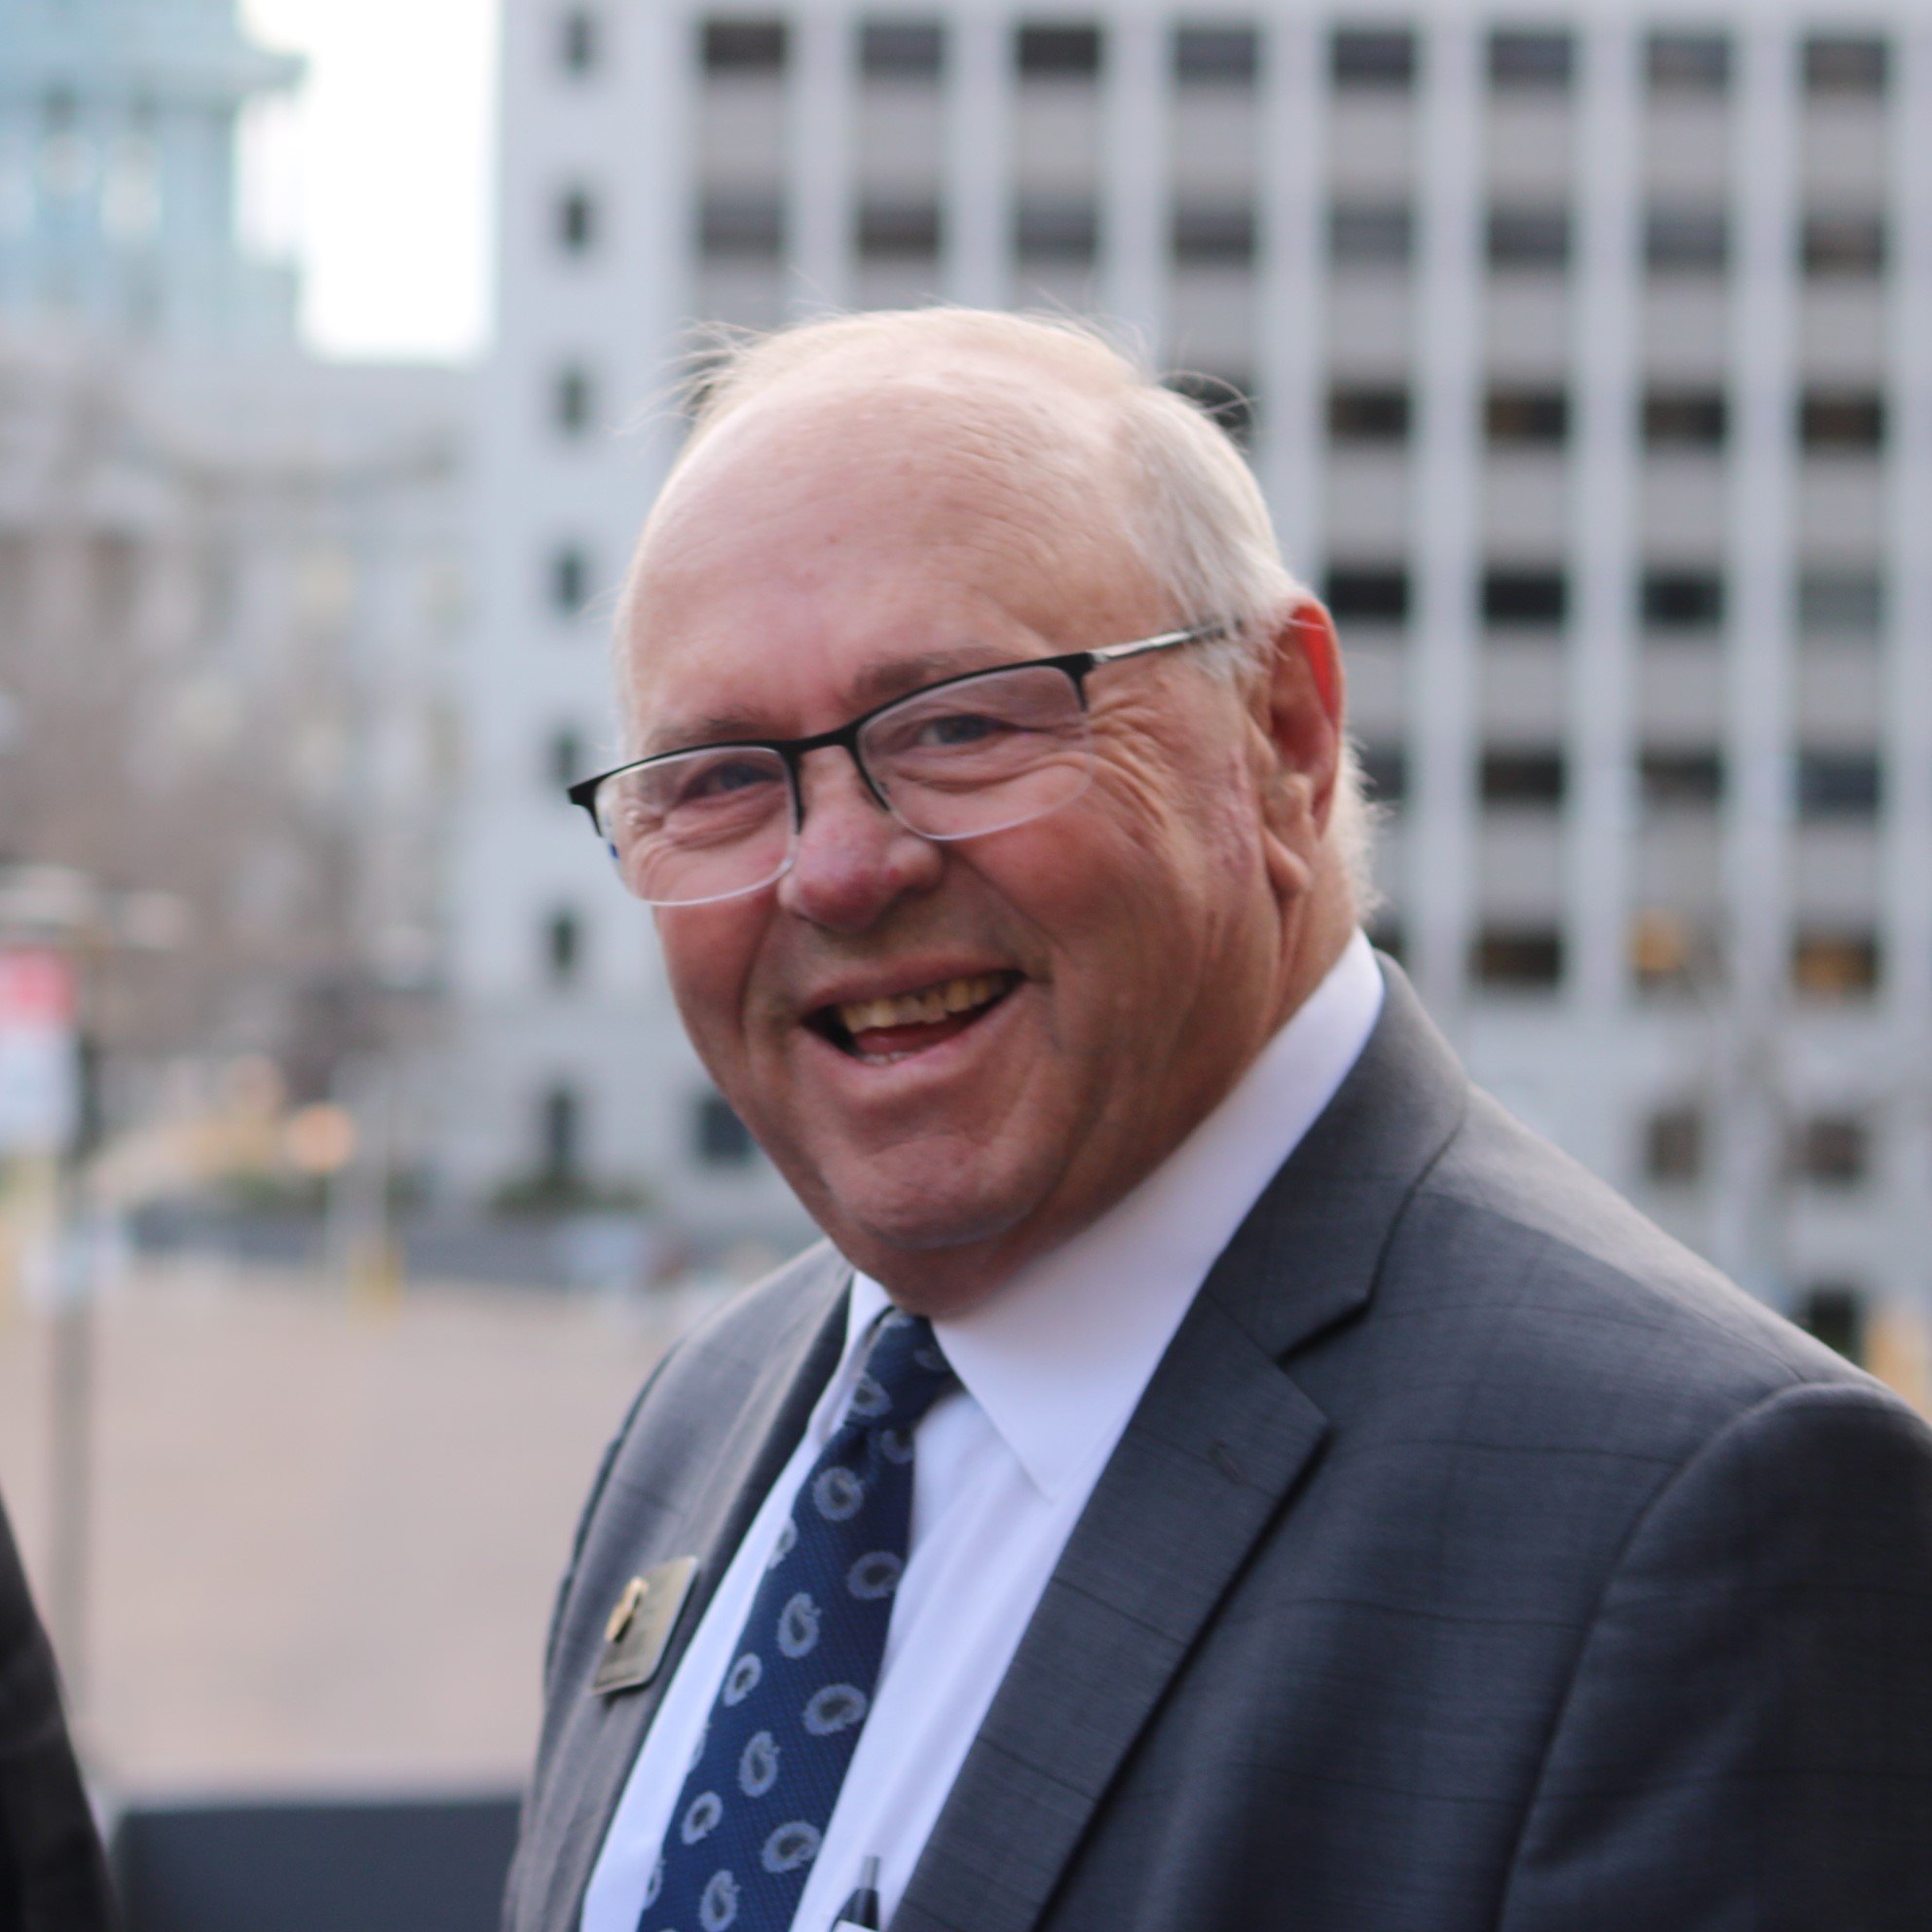 Today in the State Affairs Committee, Rep. Marc Catlin passed his bill, SB24-013! This bill will modify the compensation structure of DA&rsquo;s and assistant DA&rsquo;s. 

Find more info here: 
https://leg.colorado.gov/bills/sb24-013